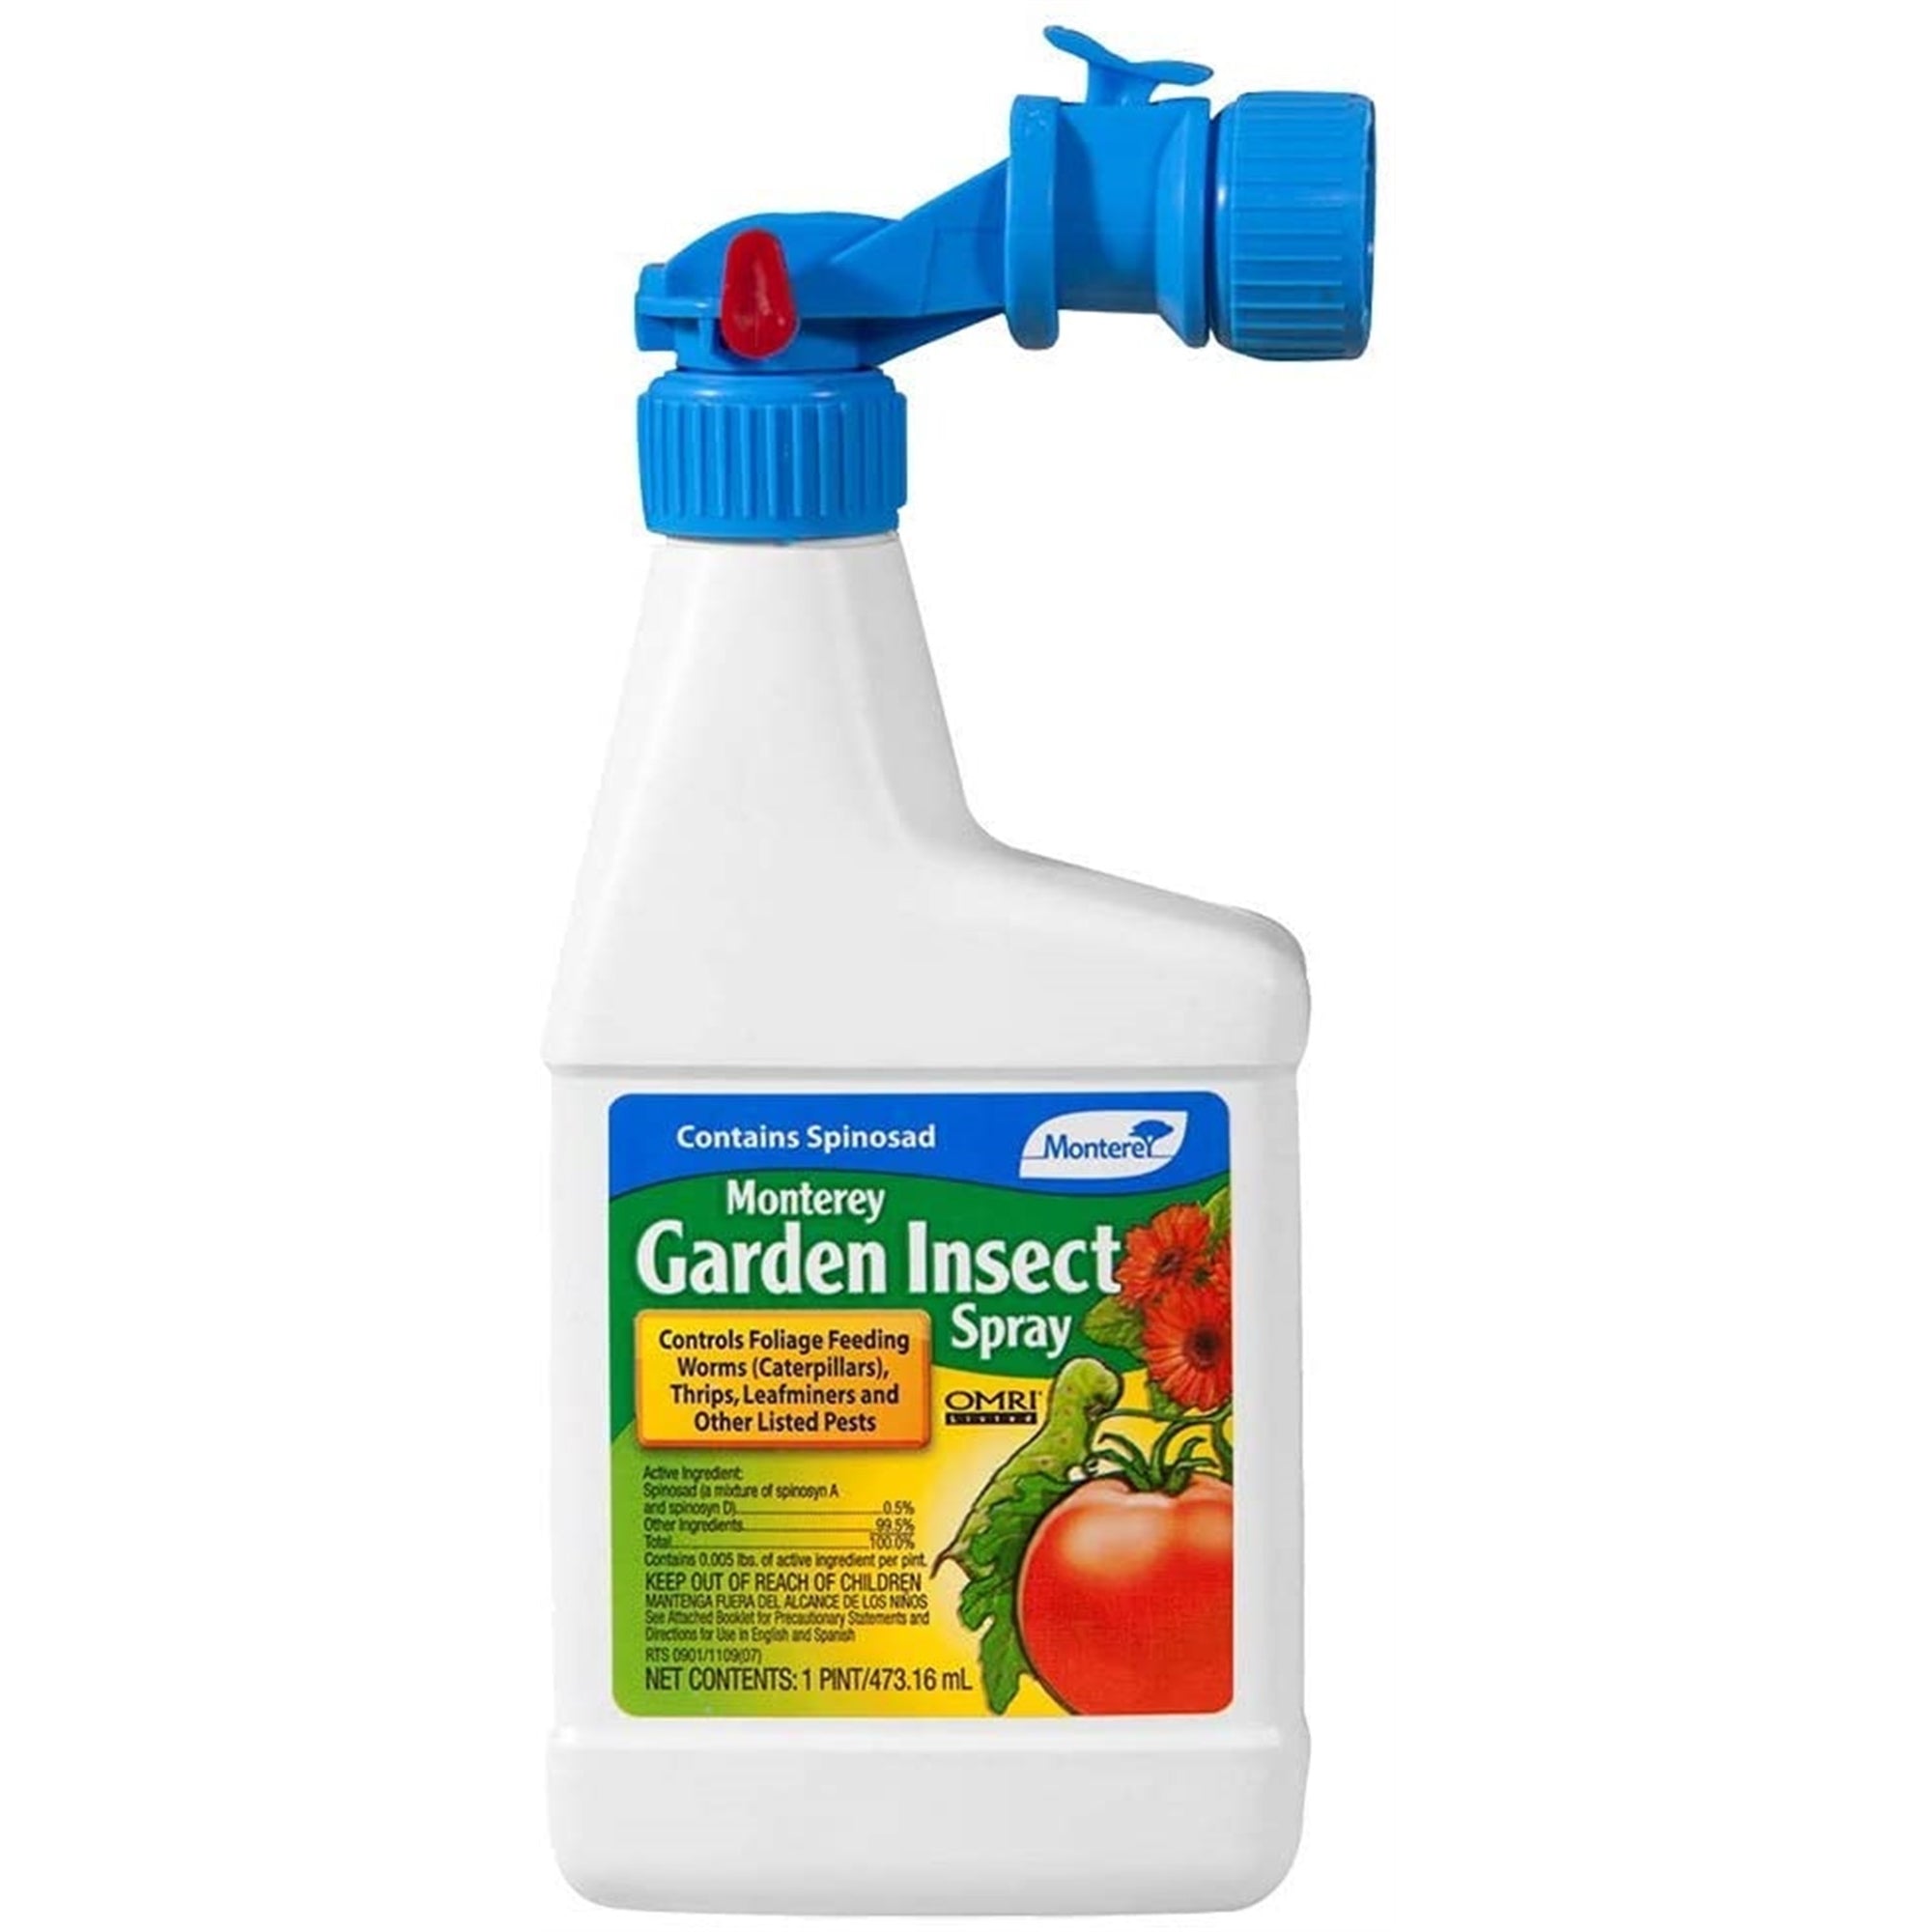 Monterey Garden Insect Spray, Insecticide & Pesticide with Spinosad, 16 oz